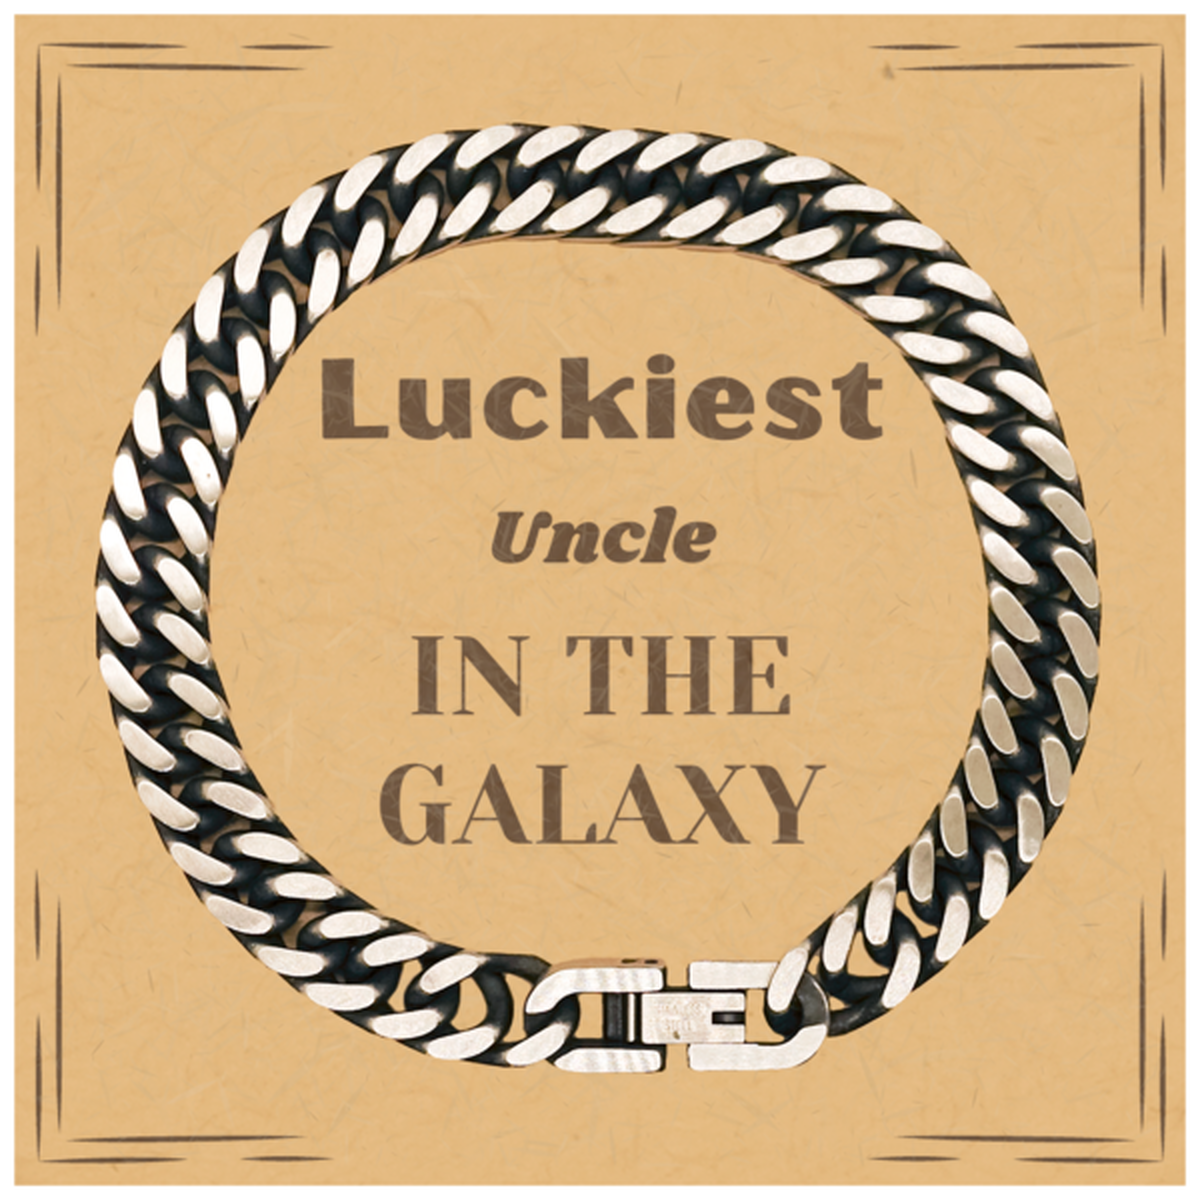 Luckiest Uncle in the Galaxy, To My Uncle Message Card Gifts, Christmas Uncle Cuban Link Chain Bracelet Gifts, X-mas Birthday Unique Gifts For Uncle Men Women